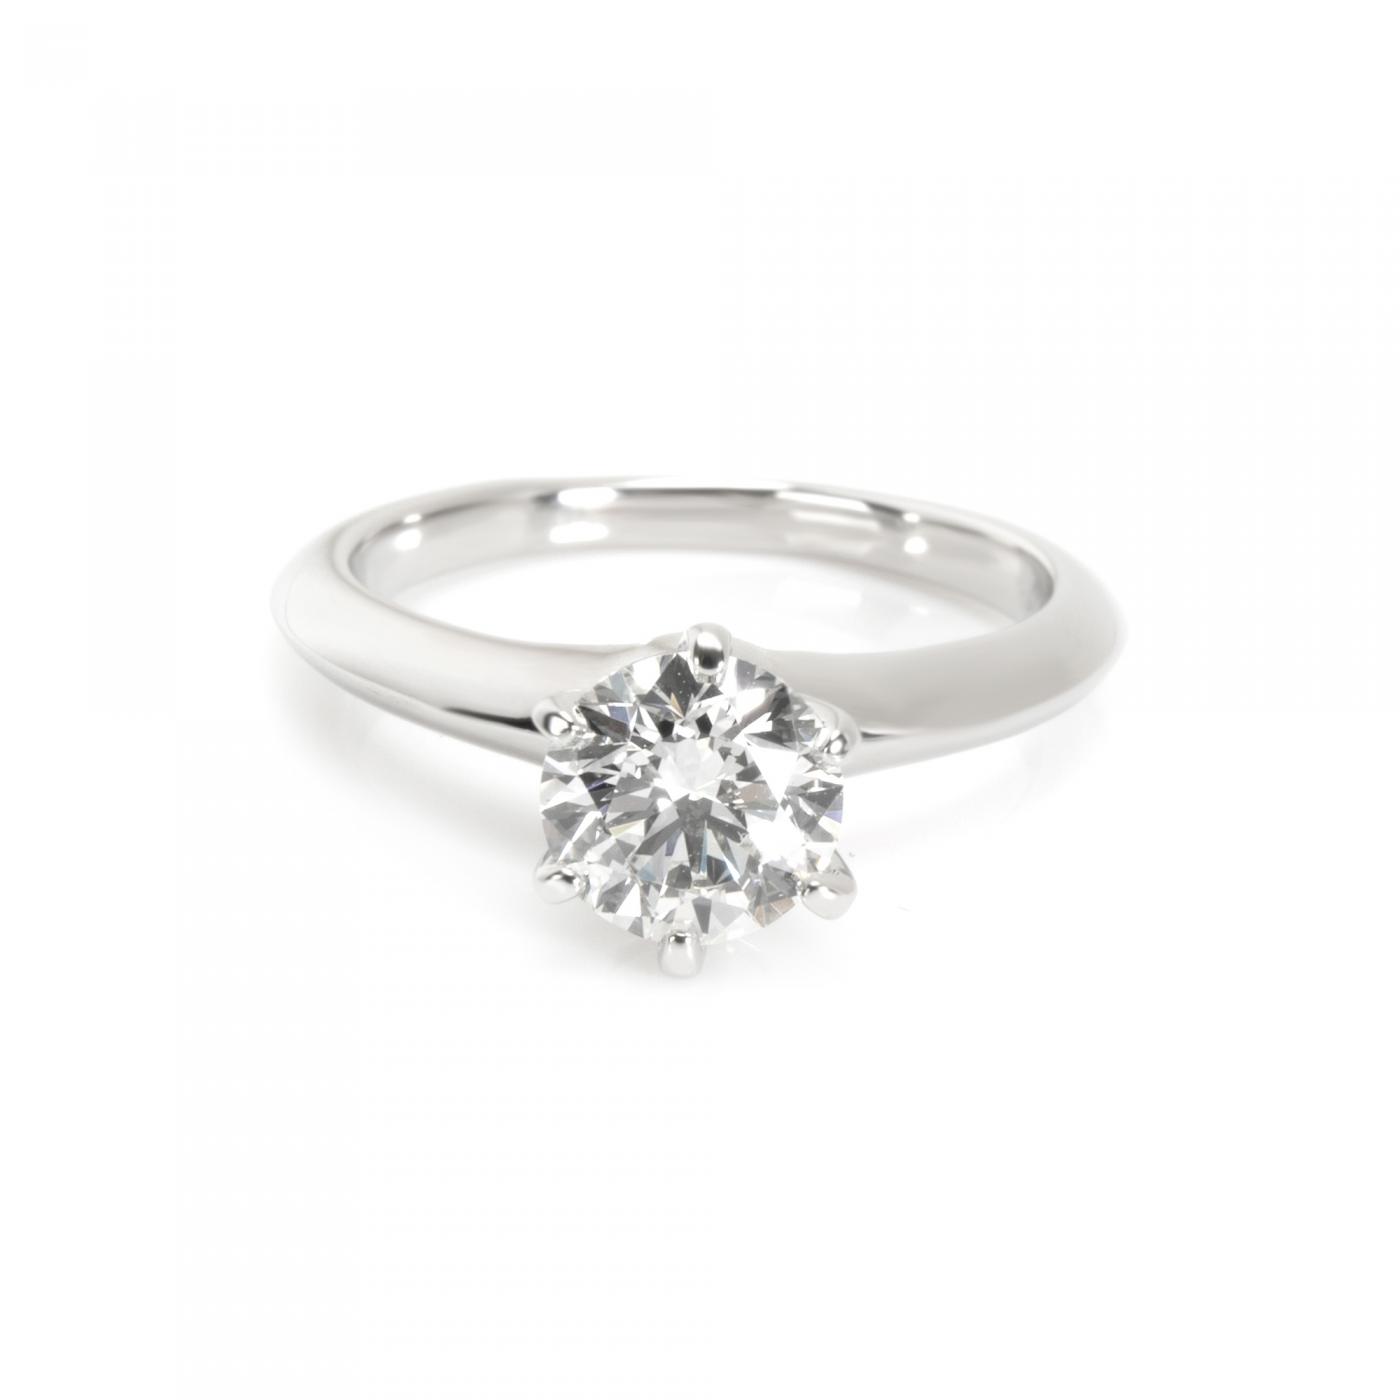 Co. Solitaire Diamond Engagement Ring 